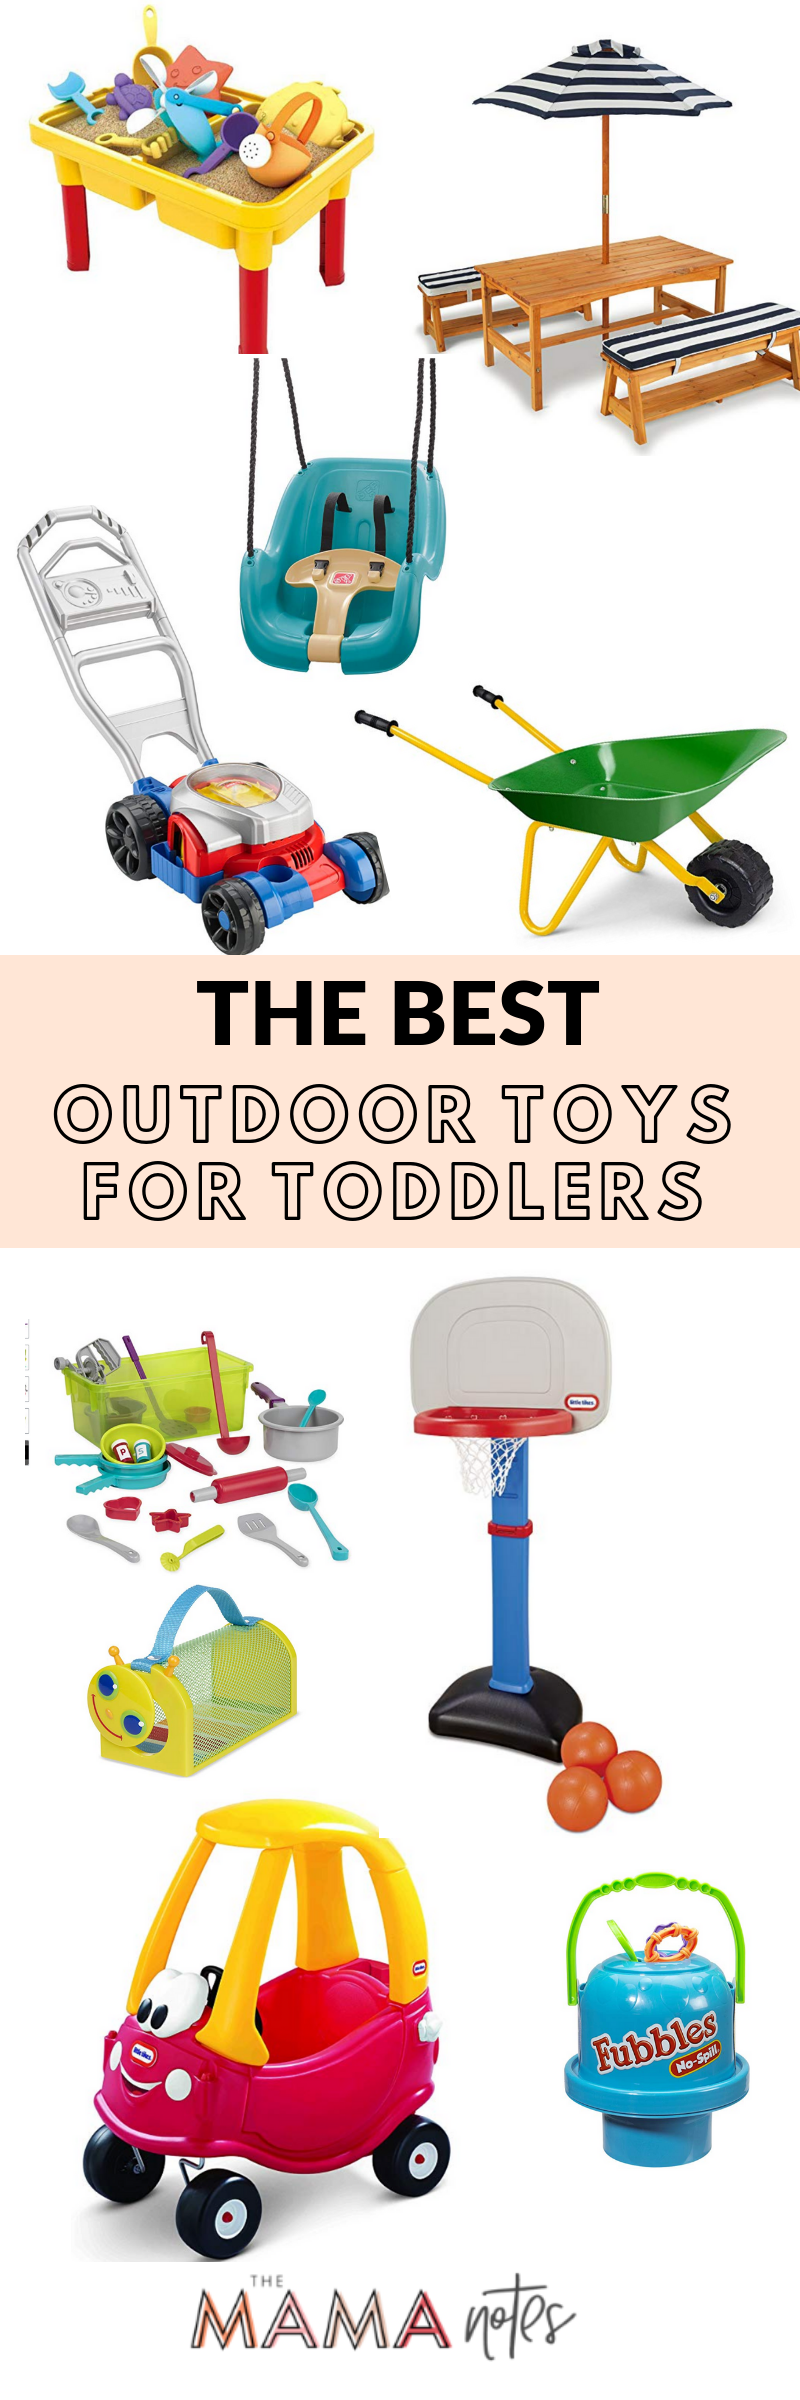 toys for outside